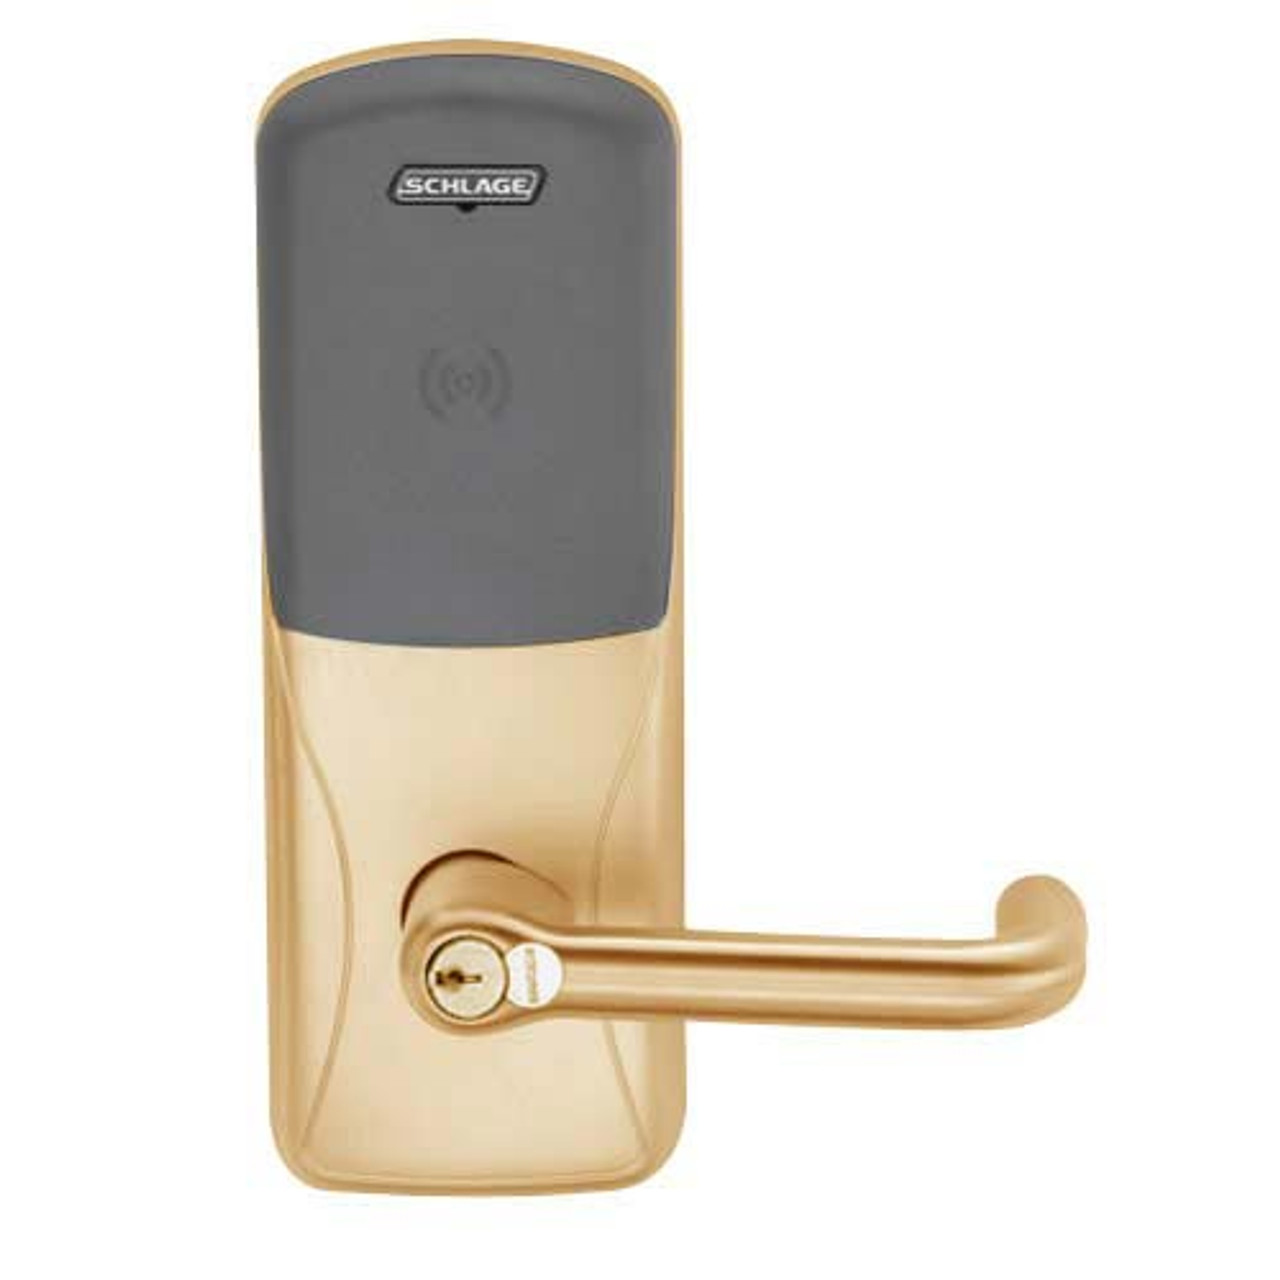 CO200-MD-40-PR-TLR-GD-29R-612 Mortise Deadbolt Standalone Electronic Proximity Locks in Satin Bronze